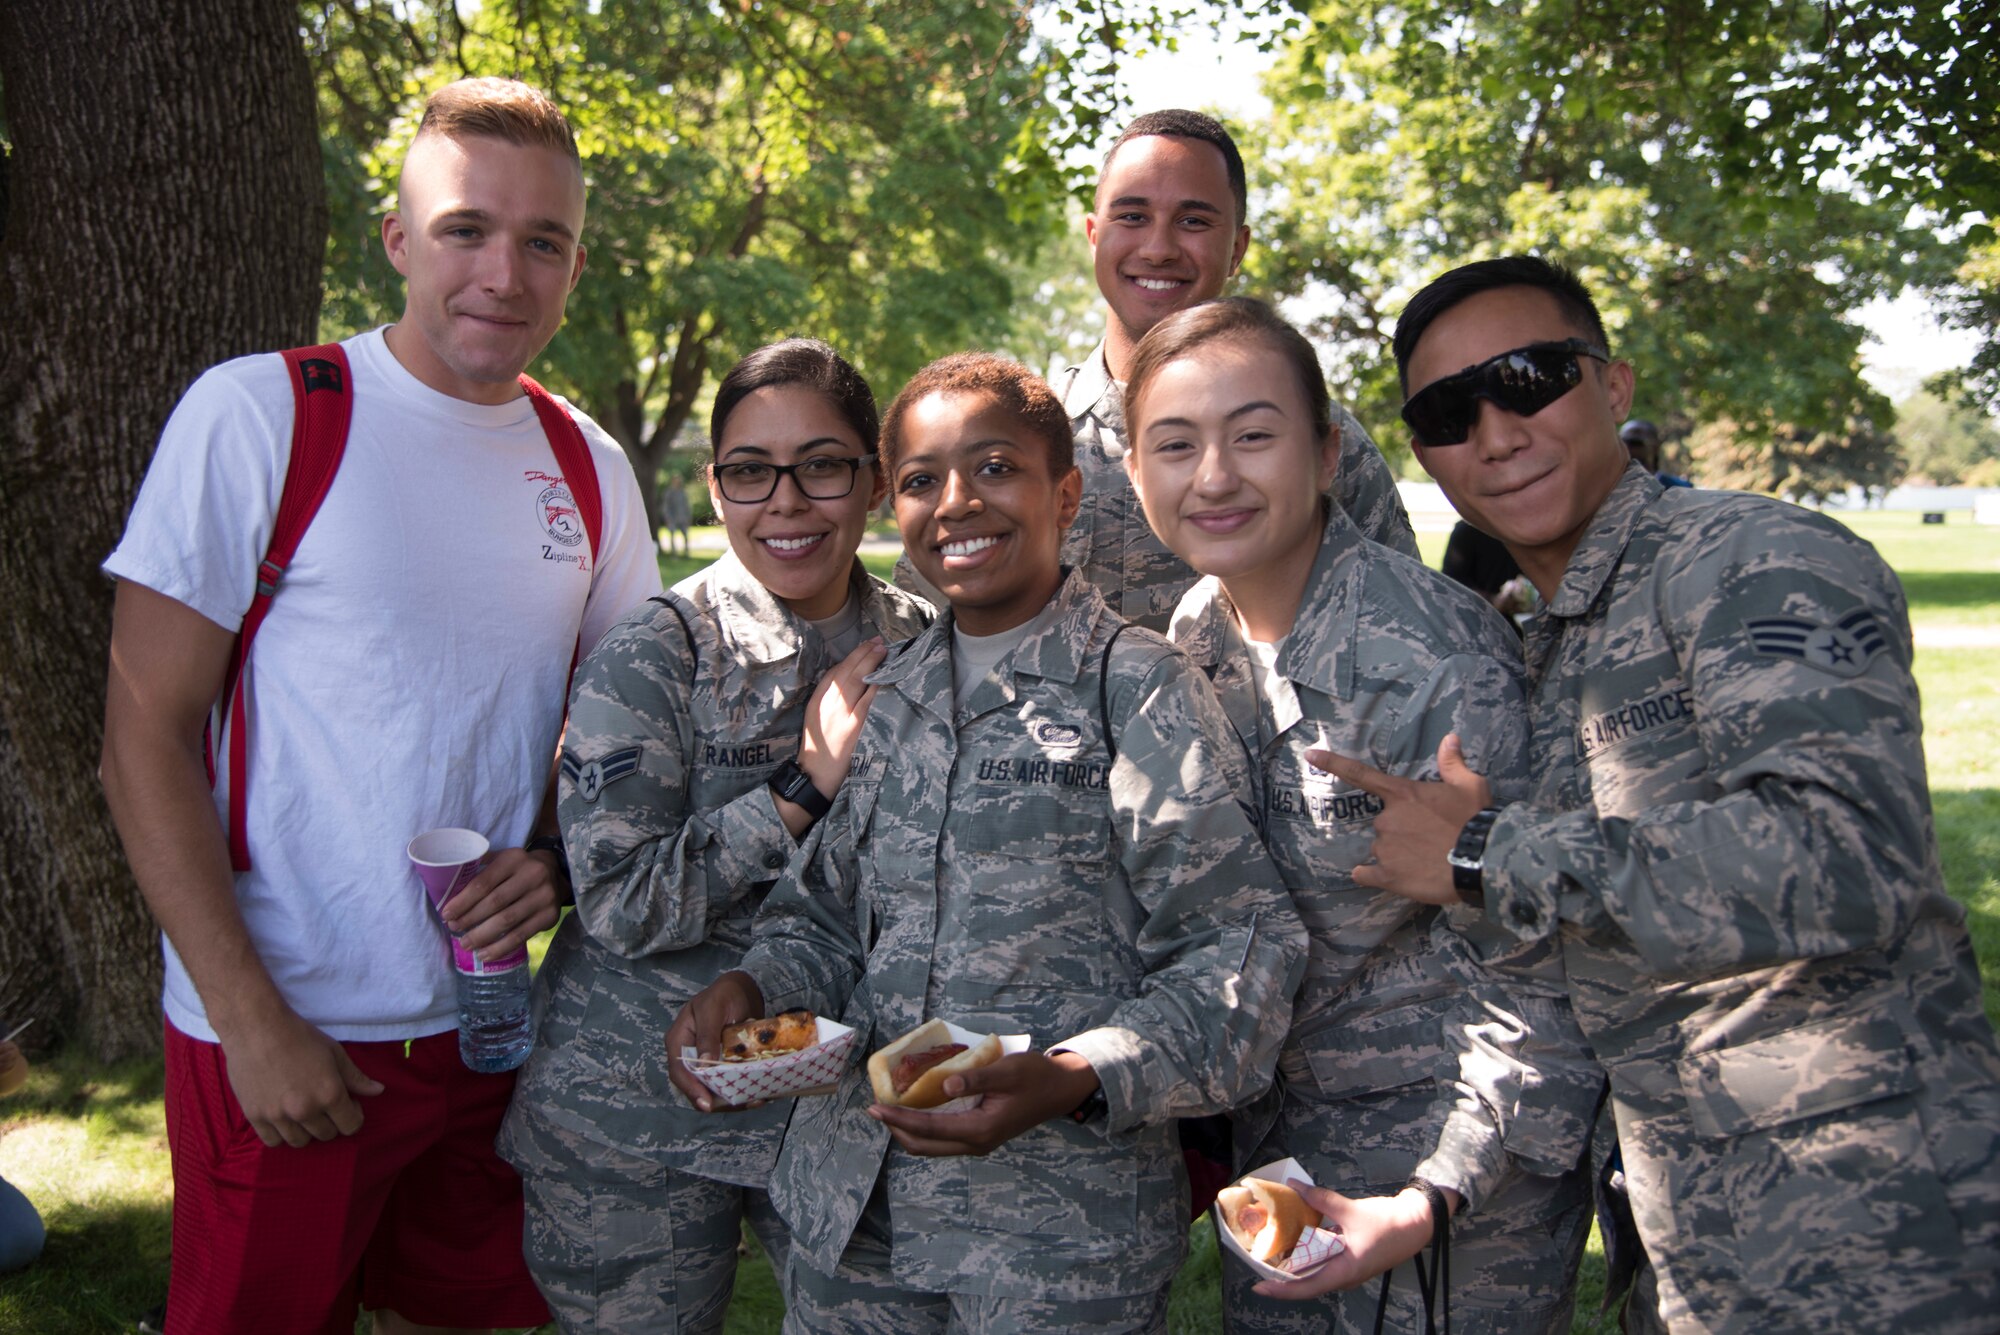 Airmen from the 92nd Comptroller Squadron pose for a group photo at the 2018 Fairchild Food Truck Festival, Aug. 28, 2018, at Fairchild Air Force Base, Washington. The yearly base picnic is typically held at the end of the summer as a way of giving back to hard-working Airmen for the busy summer months. (U.S. Air Force photo/ Senior Airman Ryan Lackey)